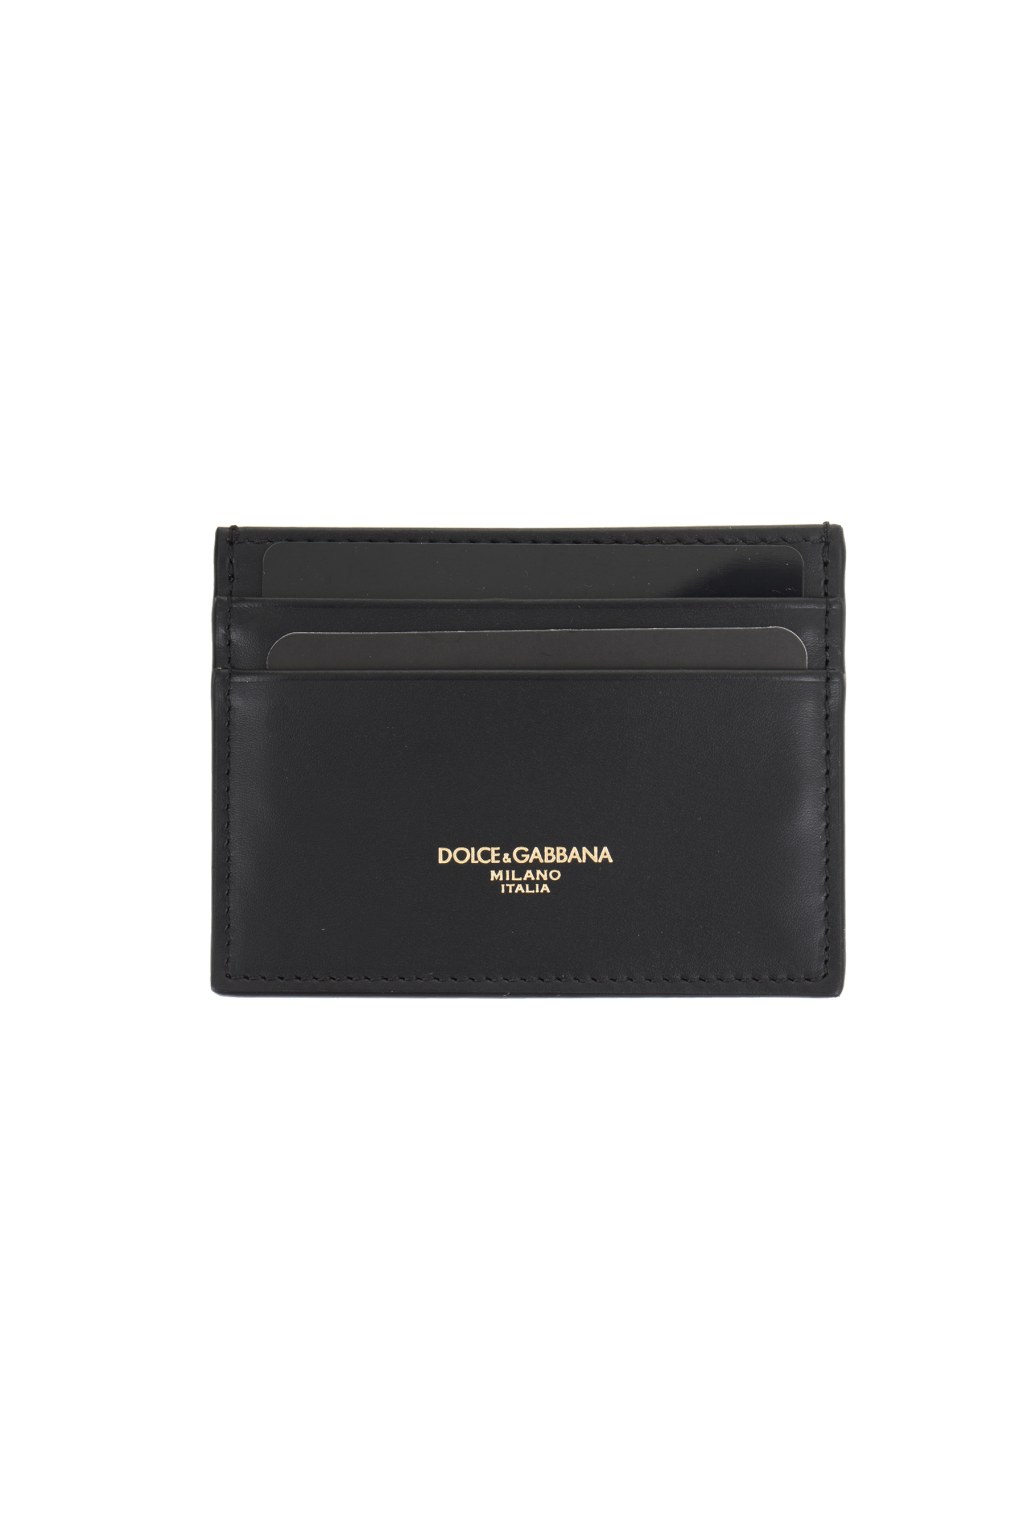 dolce gabbana calfskin - DOLCE & GABBANA Calfskin Credit Card Holder With Heat-Pressed Logo